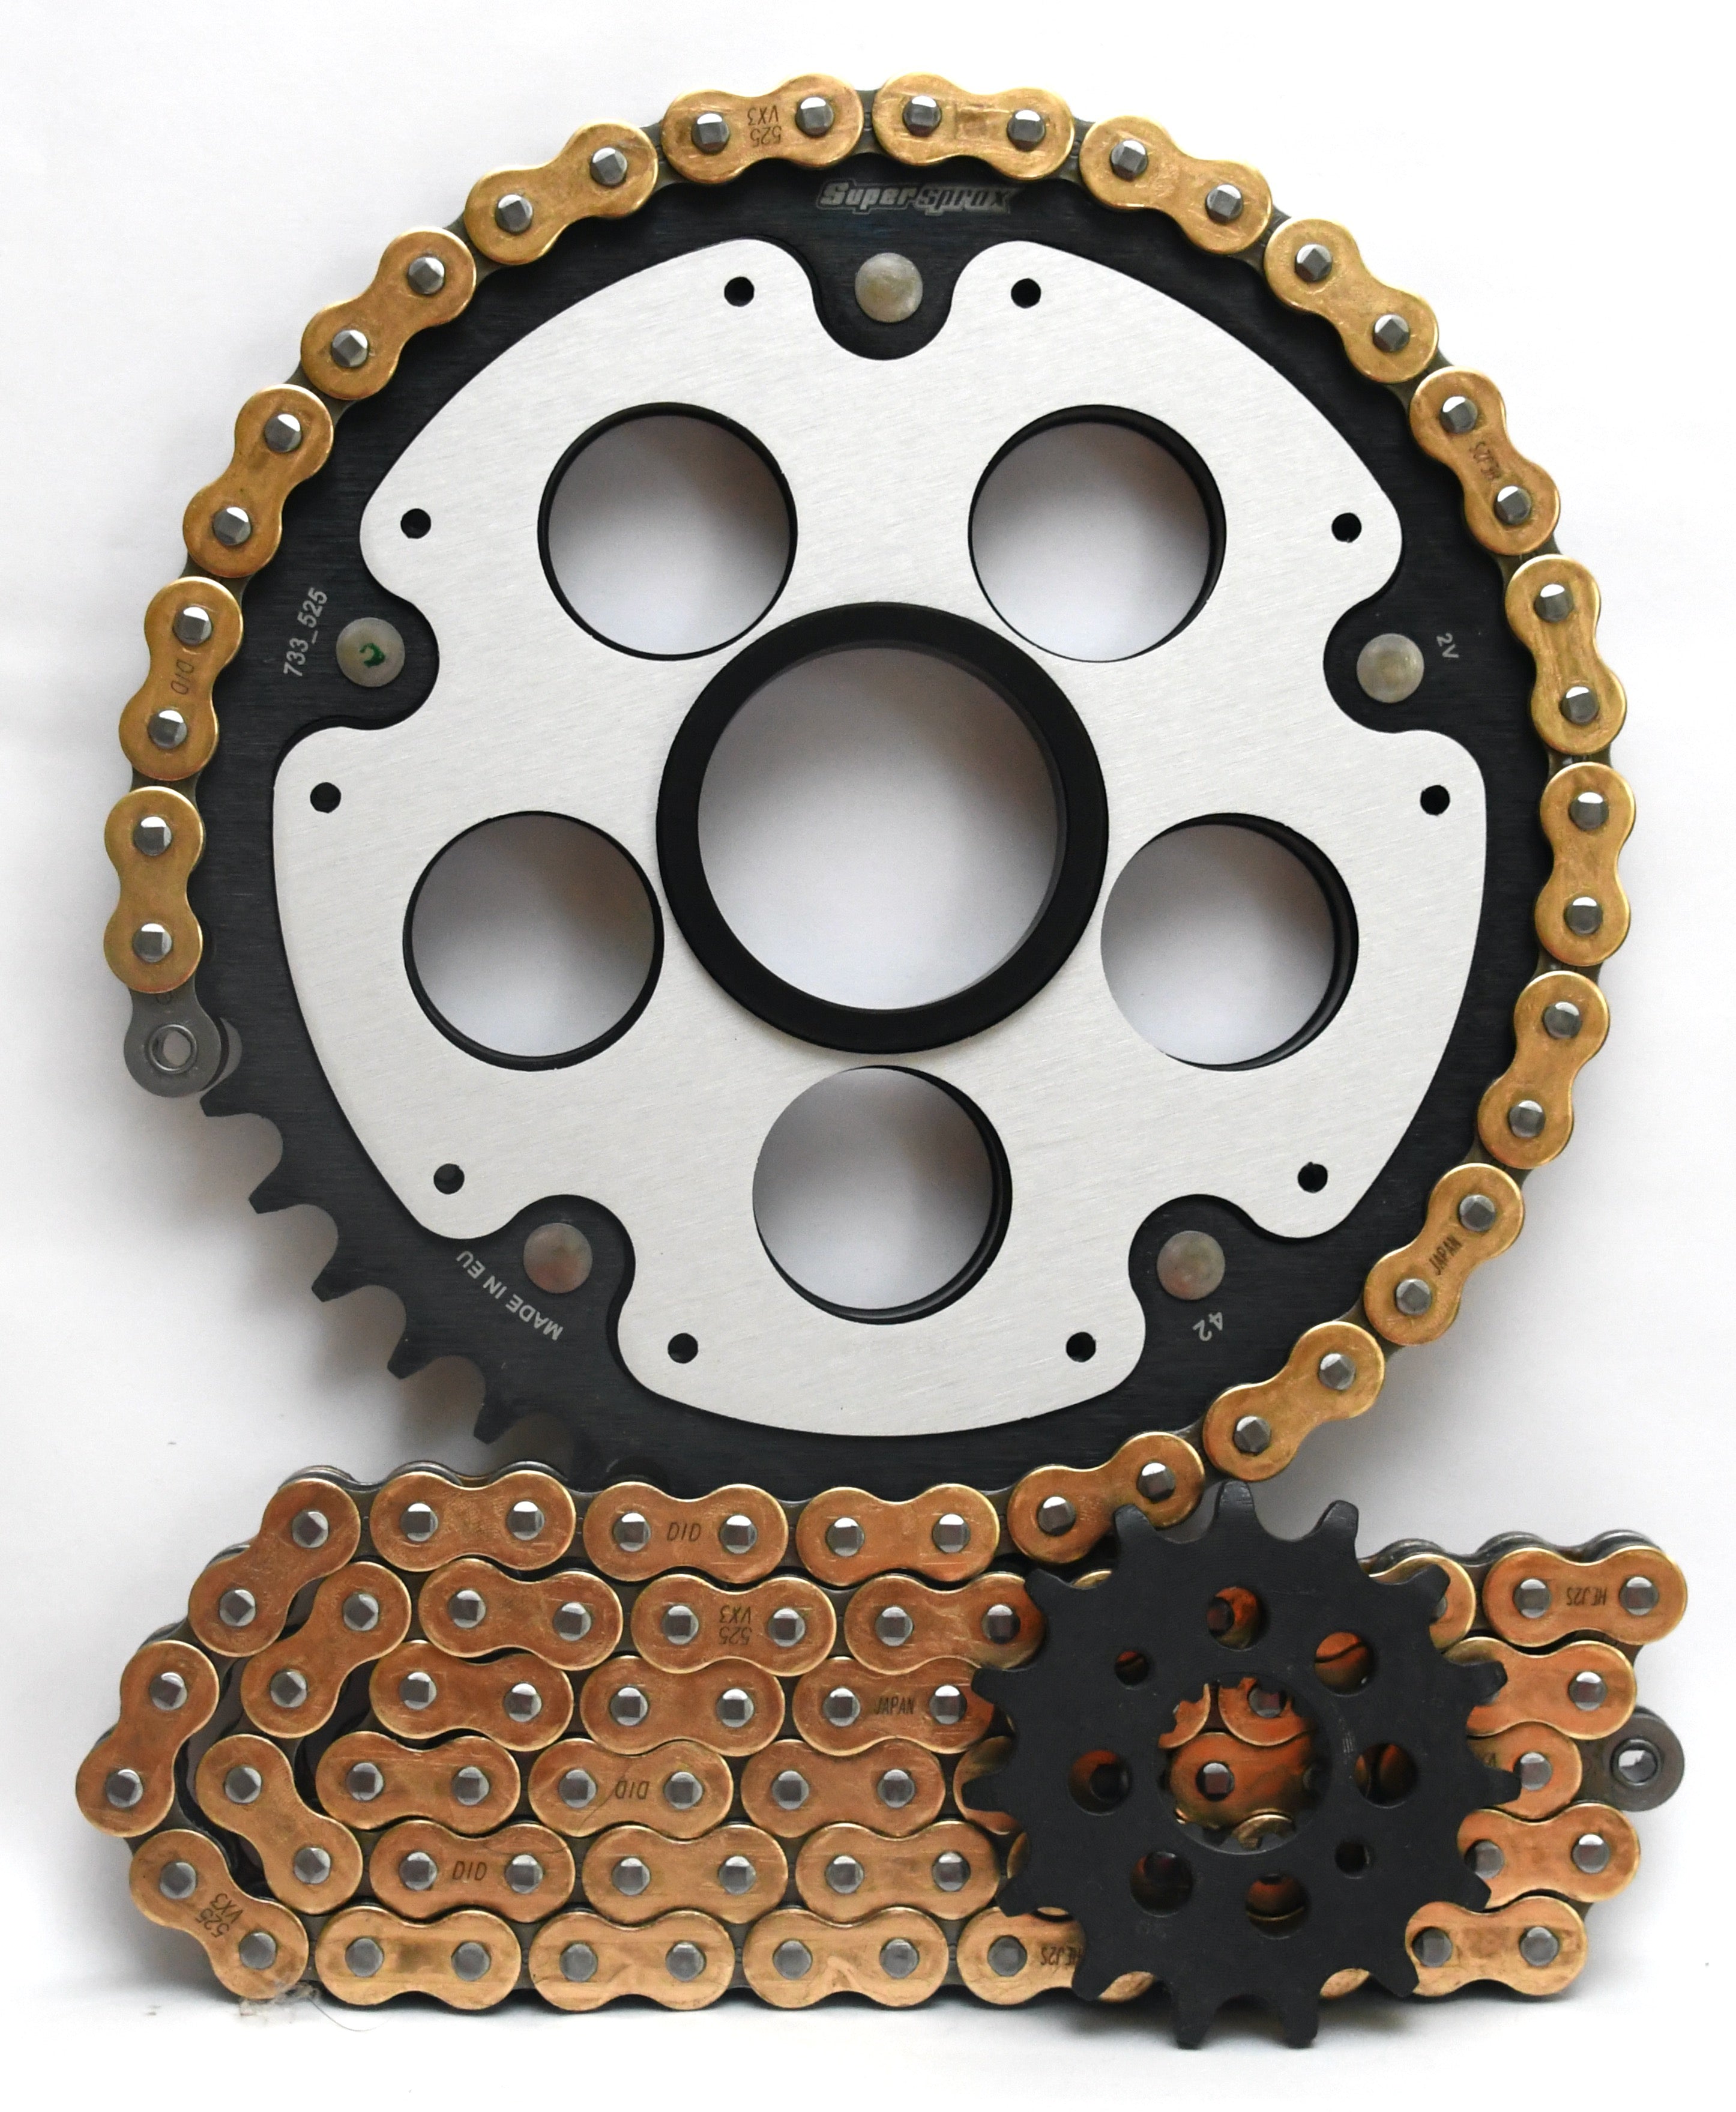 Supersprox Chain & Sprocket Kit for Ducati Hypermotard 939 (Inc SP) 2016-2018 - Standard Gearing